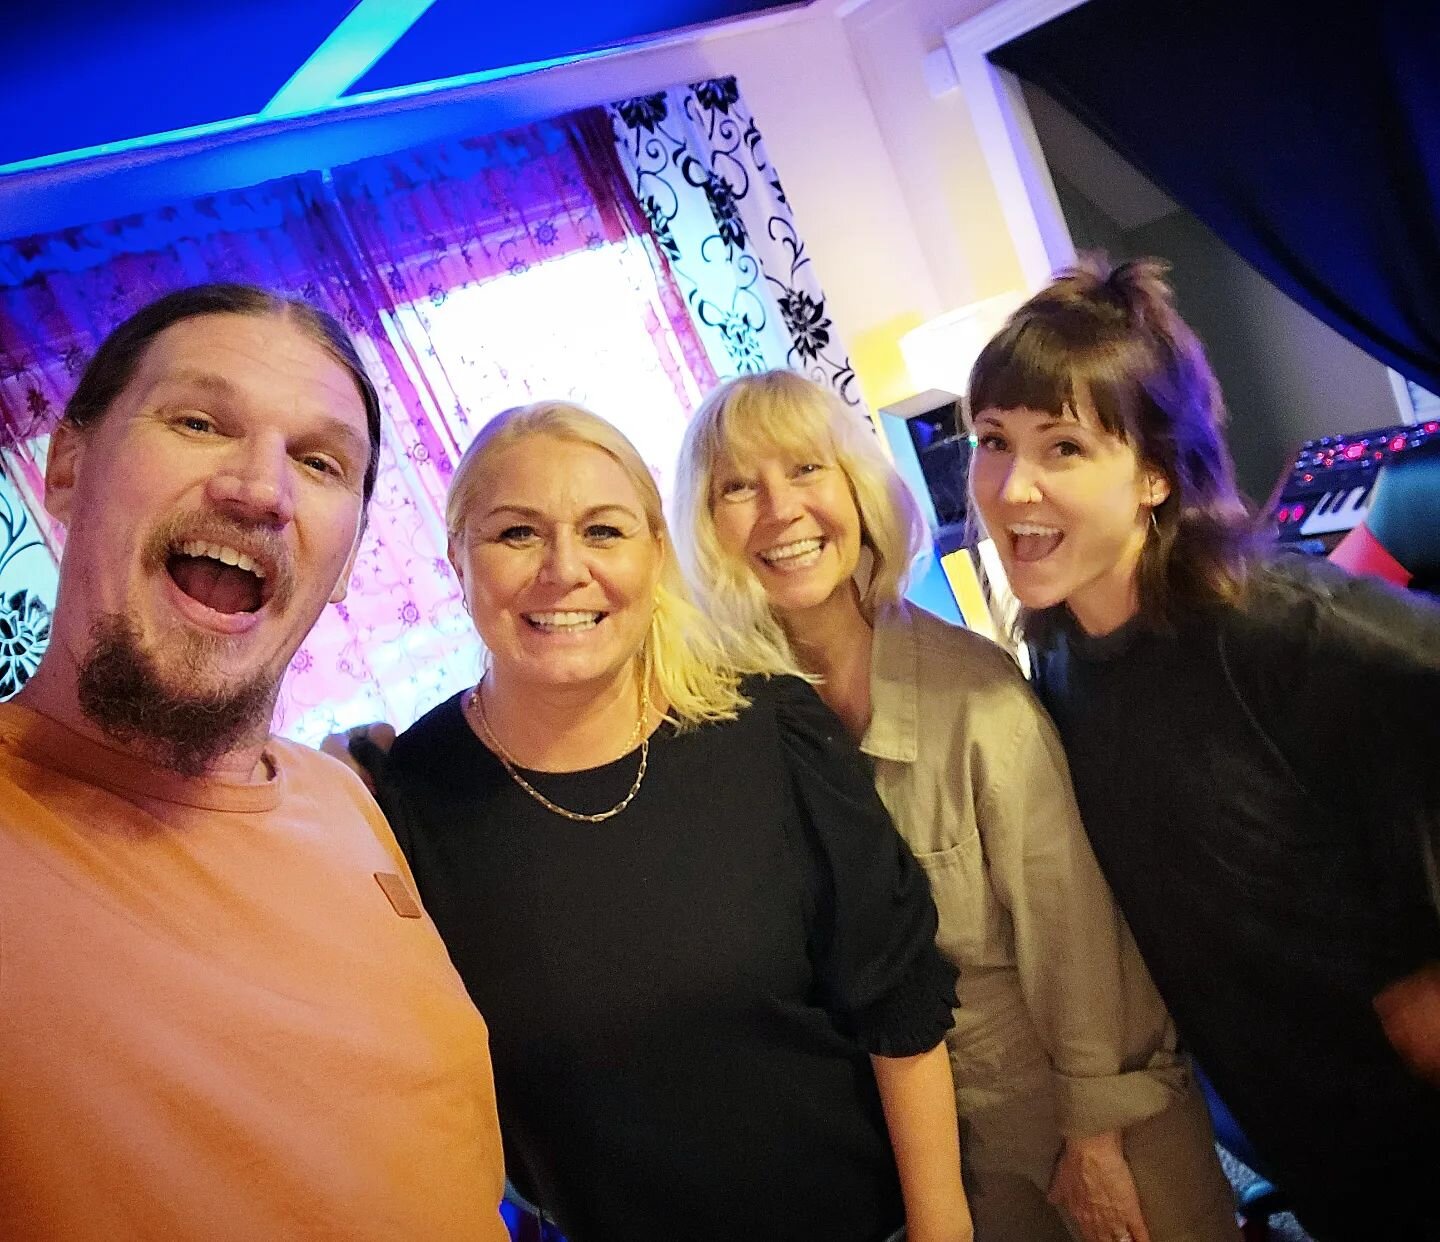 We wrote 2 songs today with this dream crew!! @ragnhildhiisaanestad @solveig_leithaug &amp; @rhyan_shirley
So amazing to be a part of these amazing projects!! Grateful!
🙌🙌🙌
@oslosoulteens @oslosoulchildren